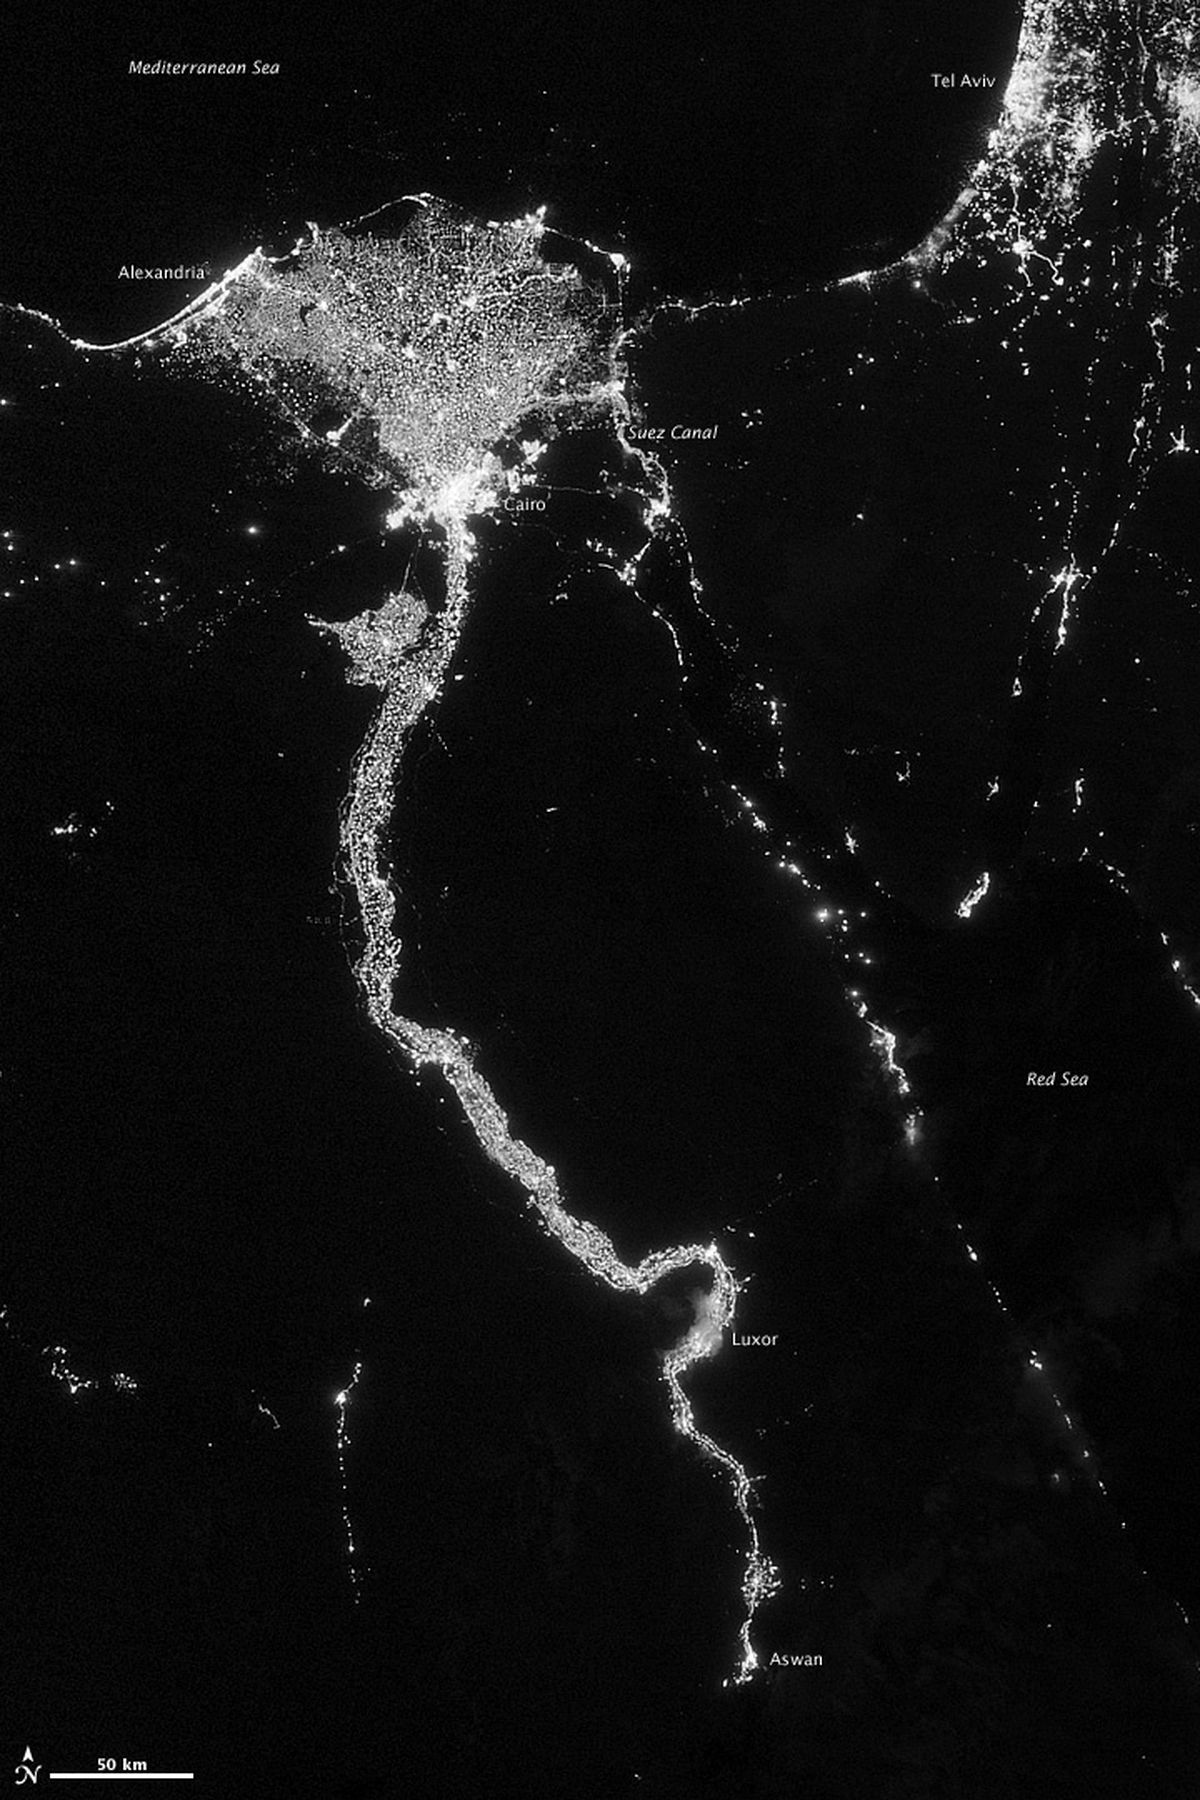 In this image from Oct. 13, 2012 provided by NASA, the Nile River valley and delta is seen at night from a composite assembled from data acquired by the Suomi NPP satellite. The image was made possible by the new satellite�s �day-night band� of the Visible Infrared Imaging Radiometer Suite (VIIRS), which detects light in a range of wavelengths from green to near-infrared and uses filtering techniques to observe dim signals such as city lights, gas flares, auroras, wildfires, and reflected moonlight. The Nile River Valley and Delta comprise less than 5 percent of Egypt�s land area, but provide a home to roughly 97 percent of the country�s population. Nothing makes the location of human population clearer than the lights illuminating the valley and delta at night. The city lights resemble a giant calla lily, just one with a kink in its stem near the city of Luxor. Some of the brightest lights occur around Cairo, but lights are abundant along the length of the river. Bright city lights also occur along the Suez Canal and around Tel Aviv. Away from the lights, however, land and water appear uniformly black. This image was acquired near the time of the new Moon, and little moonlight was available to brighten land and water surfaces. (Nasa)